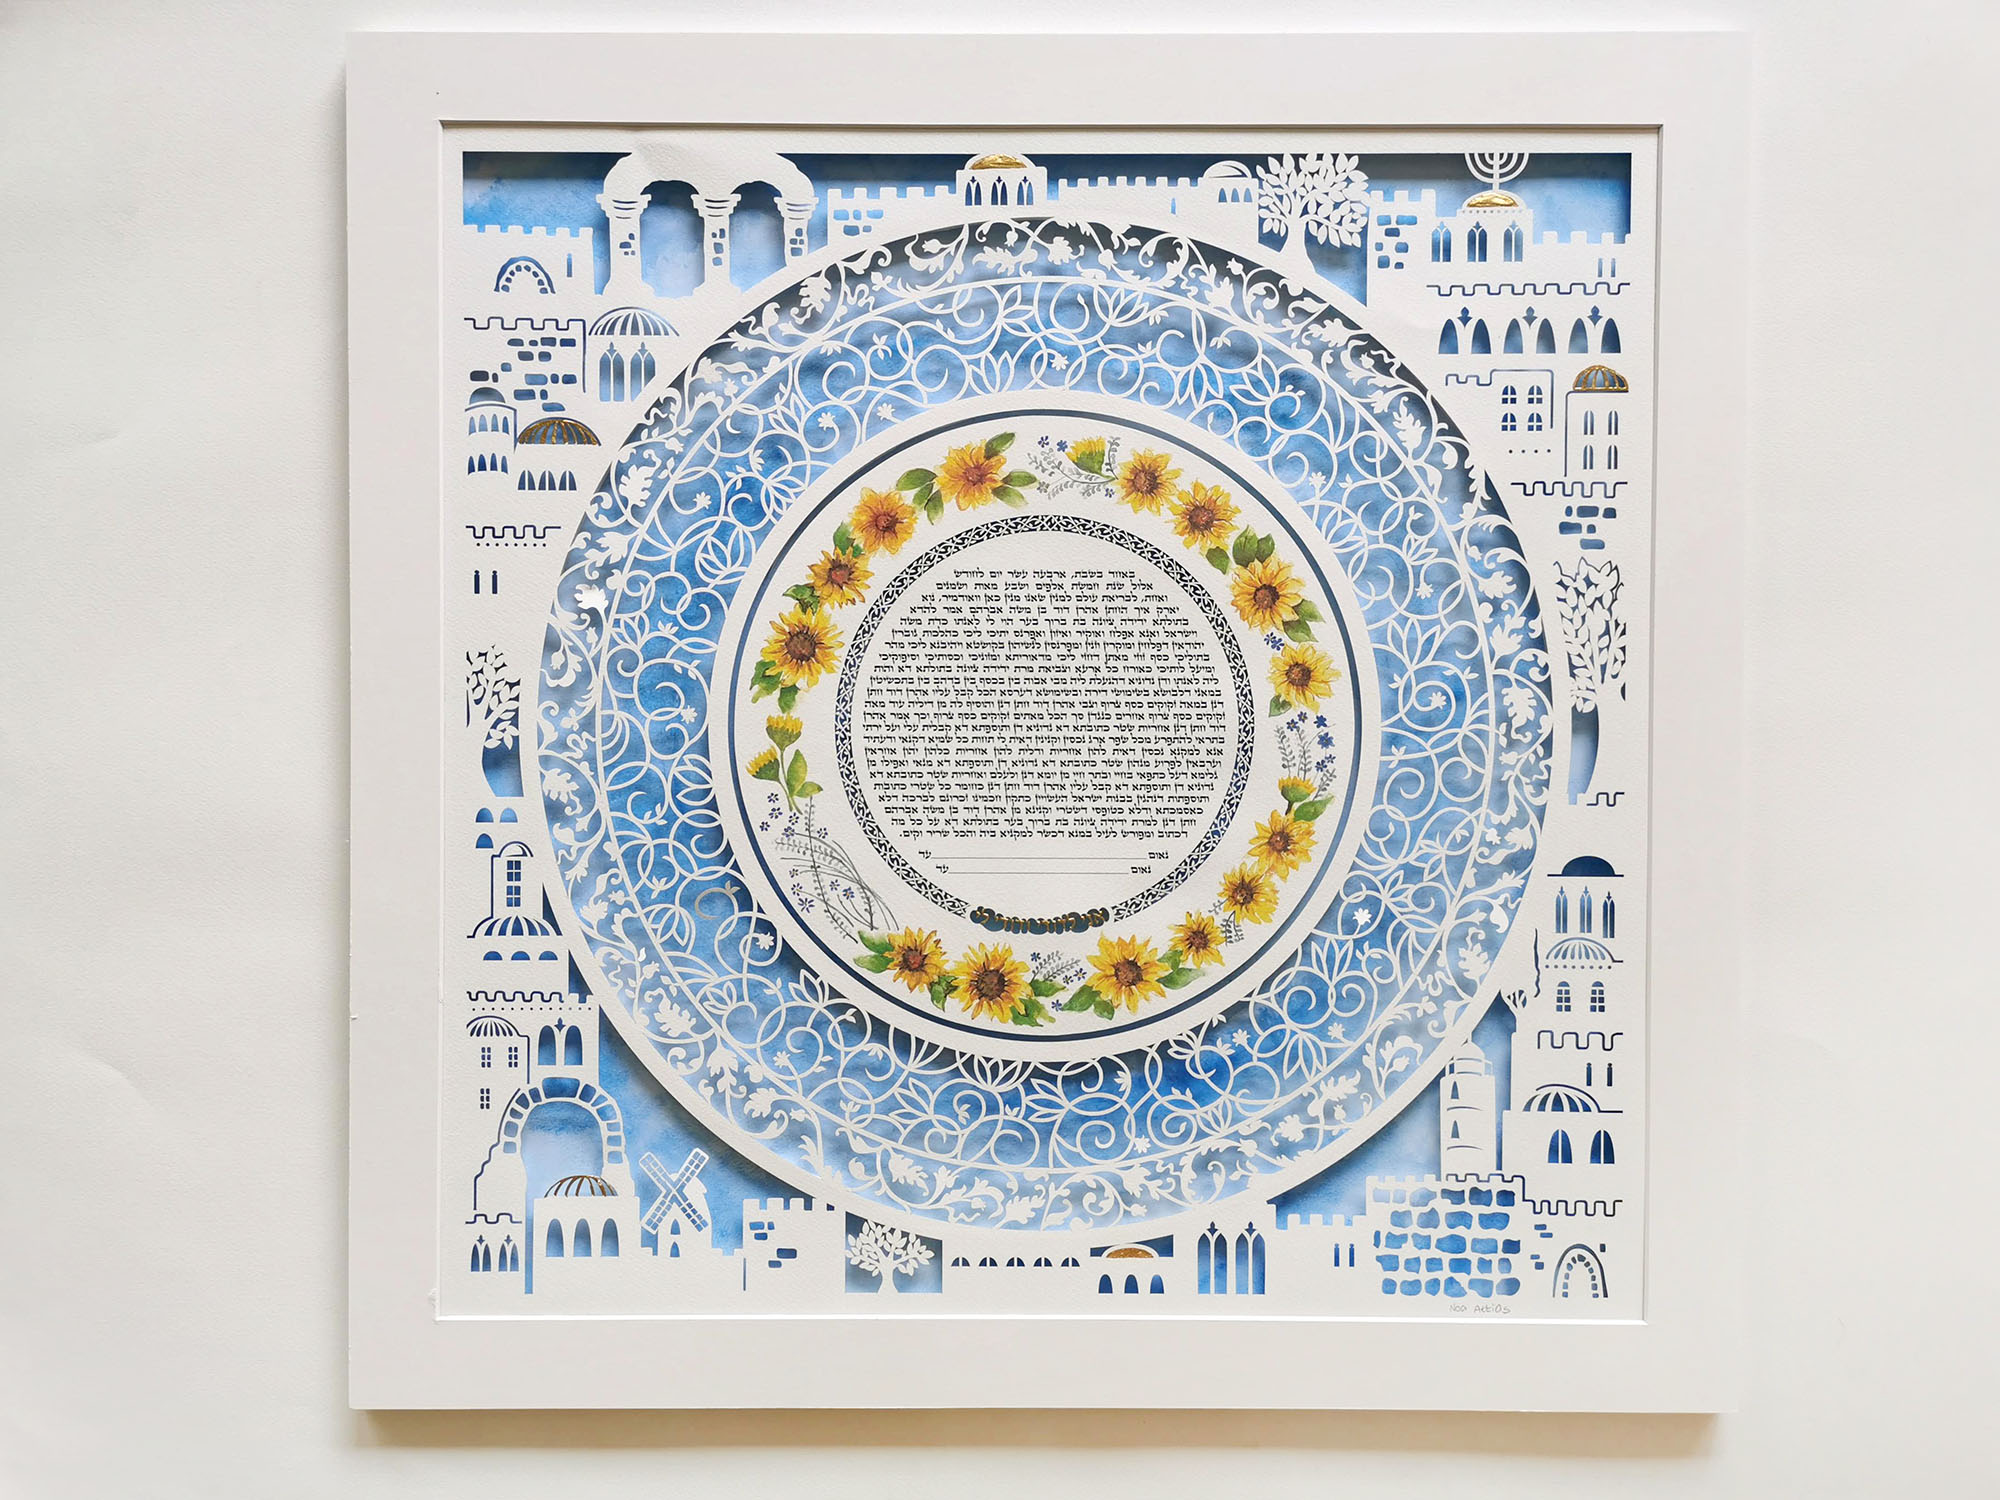 An image showing a beautifully preserved Ketubah in a glass frame, symbolizing its lifelong value.